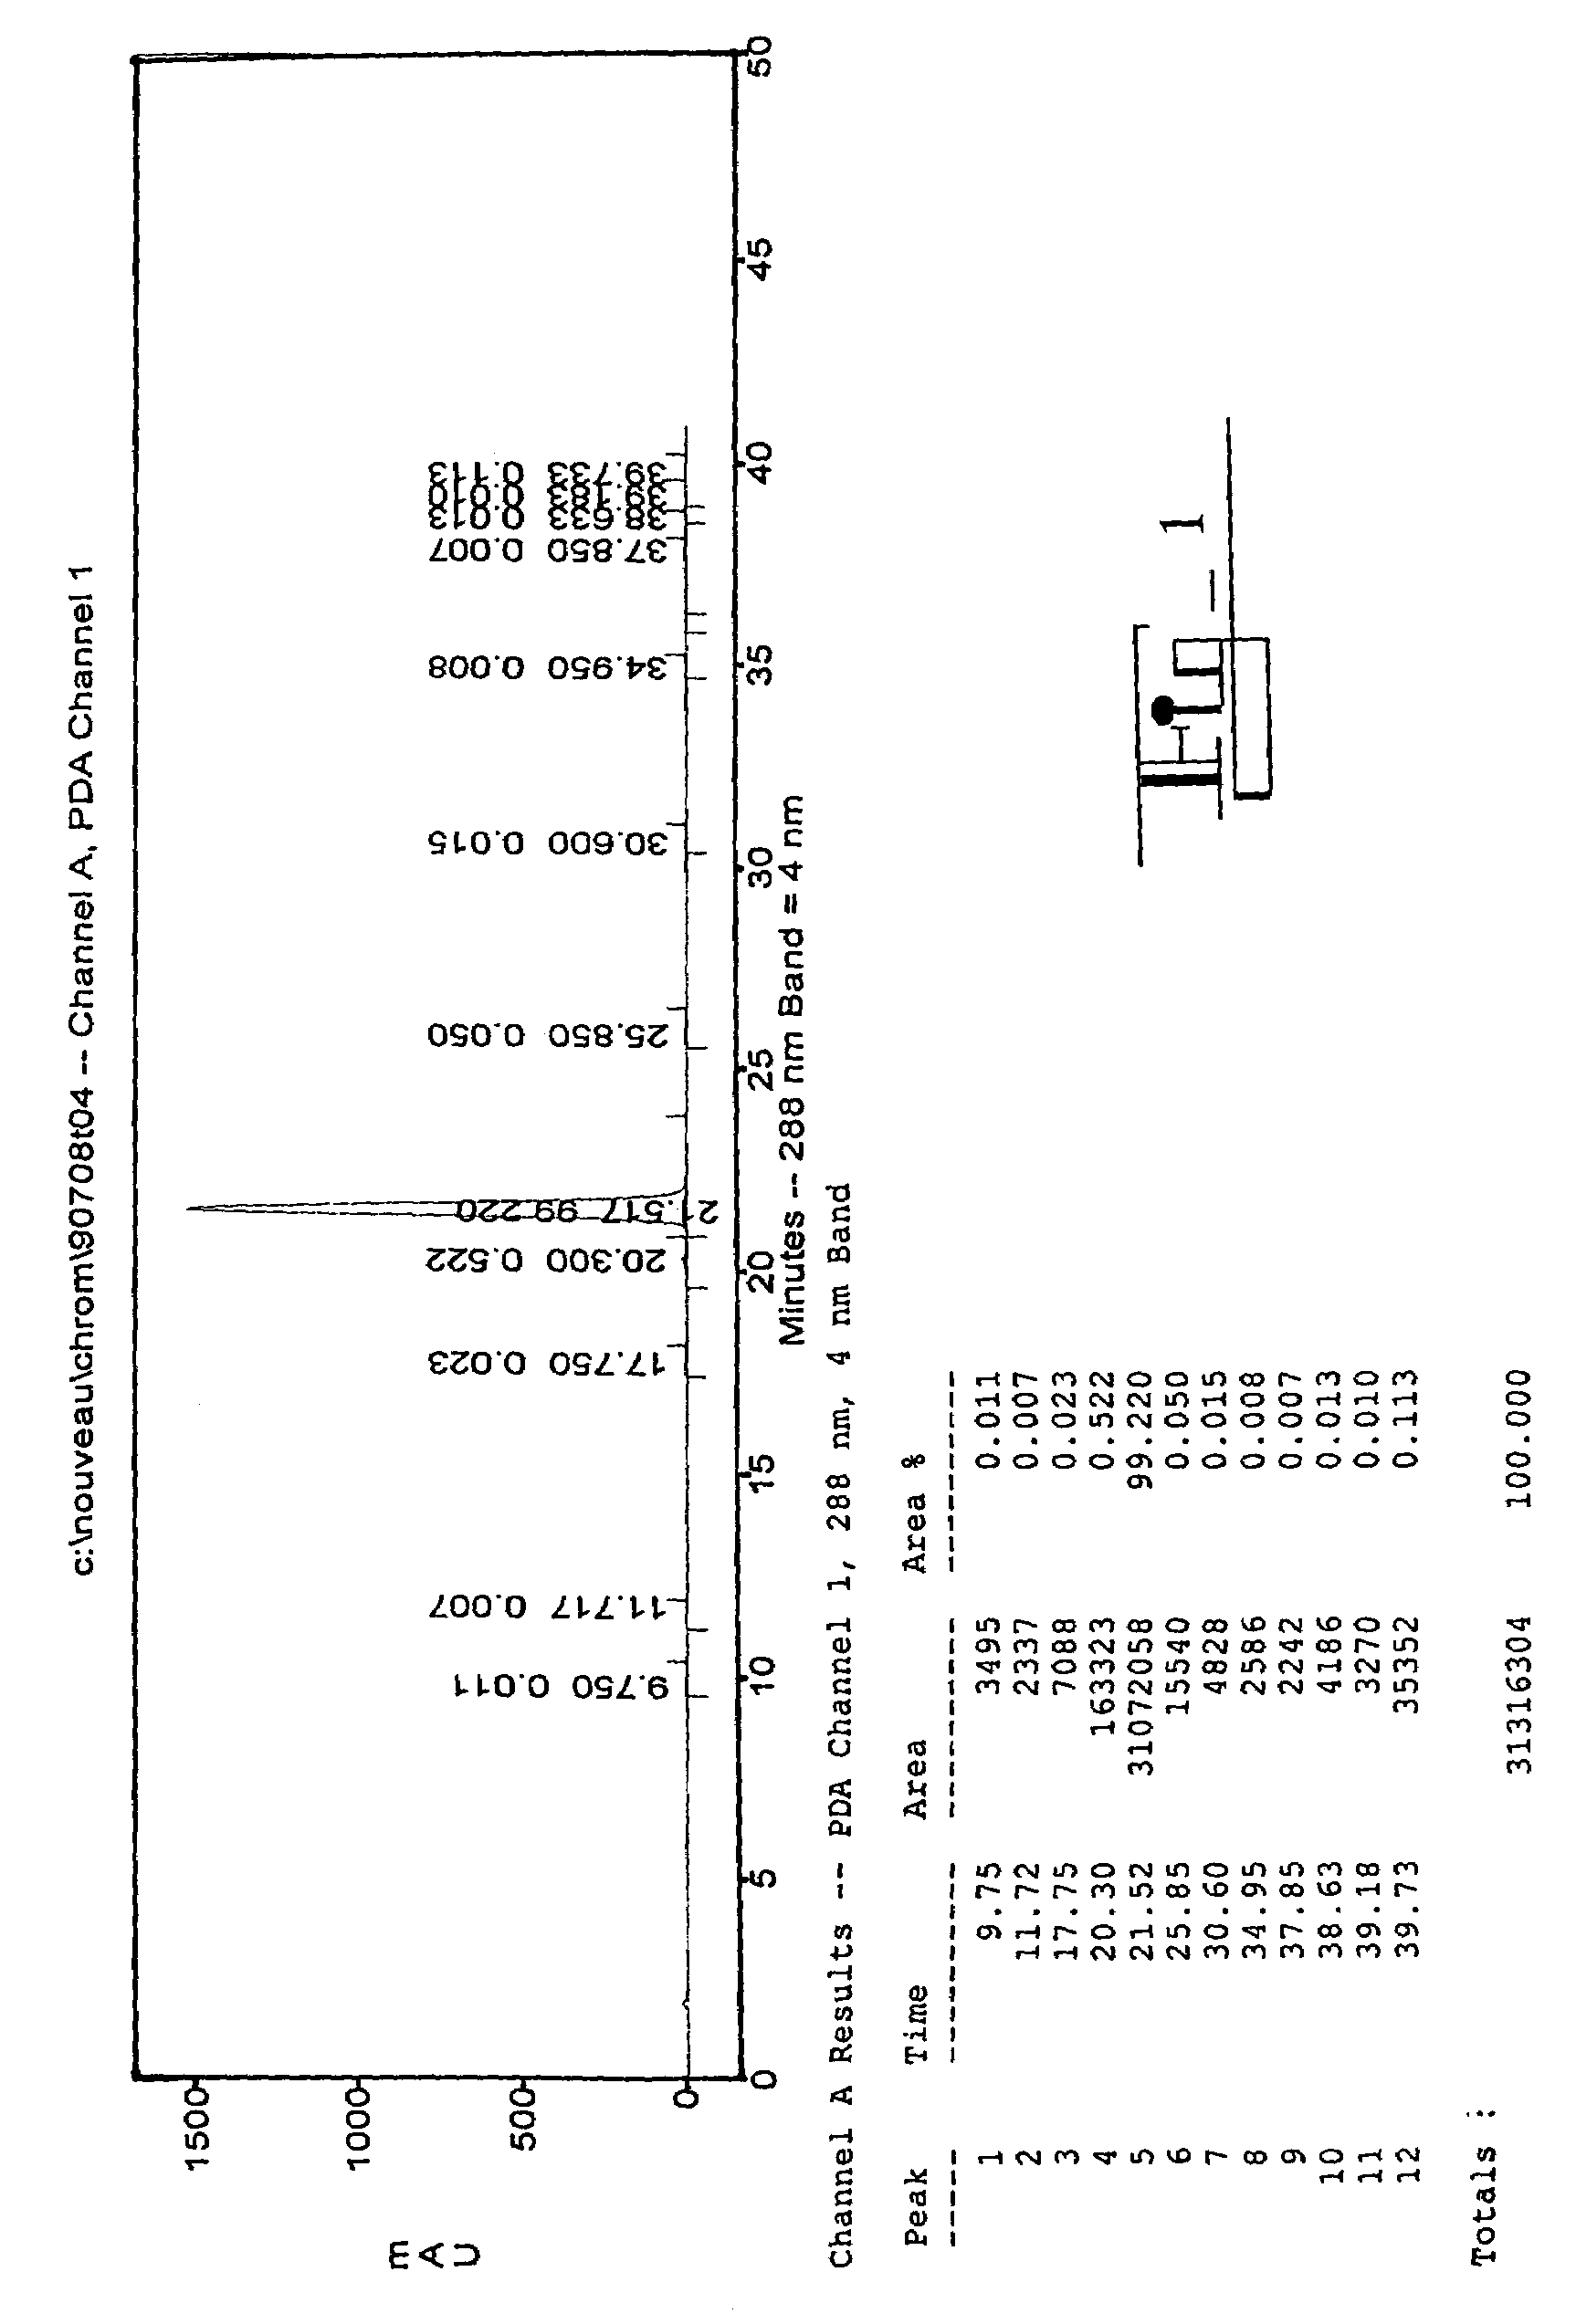 Compositions comprising purified 2-methoxyestradiol and methods of producing same